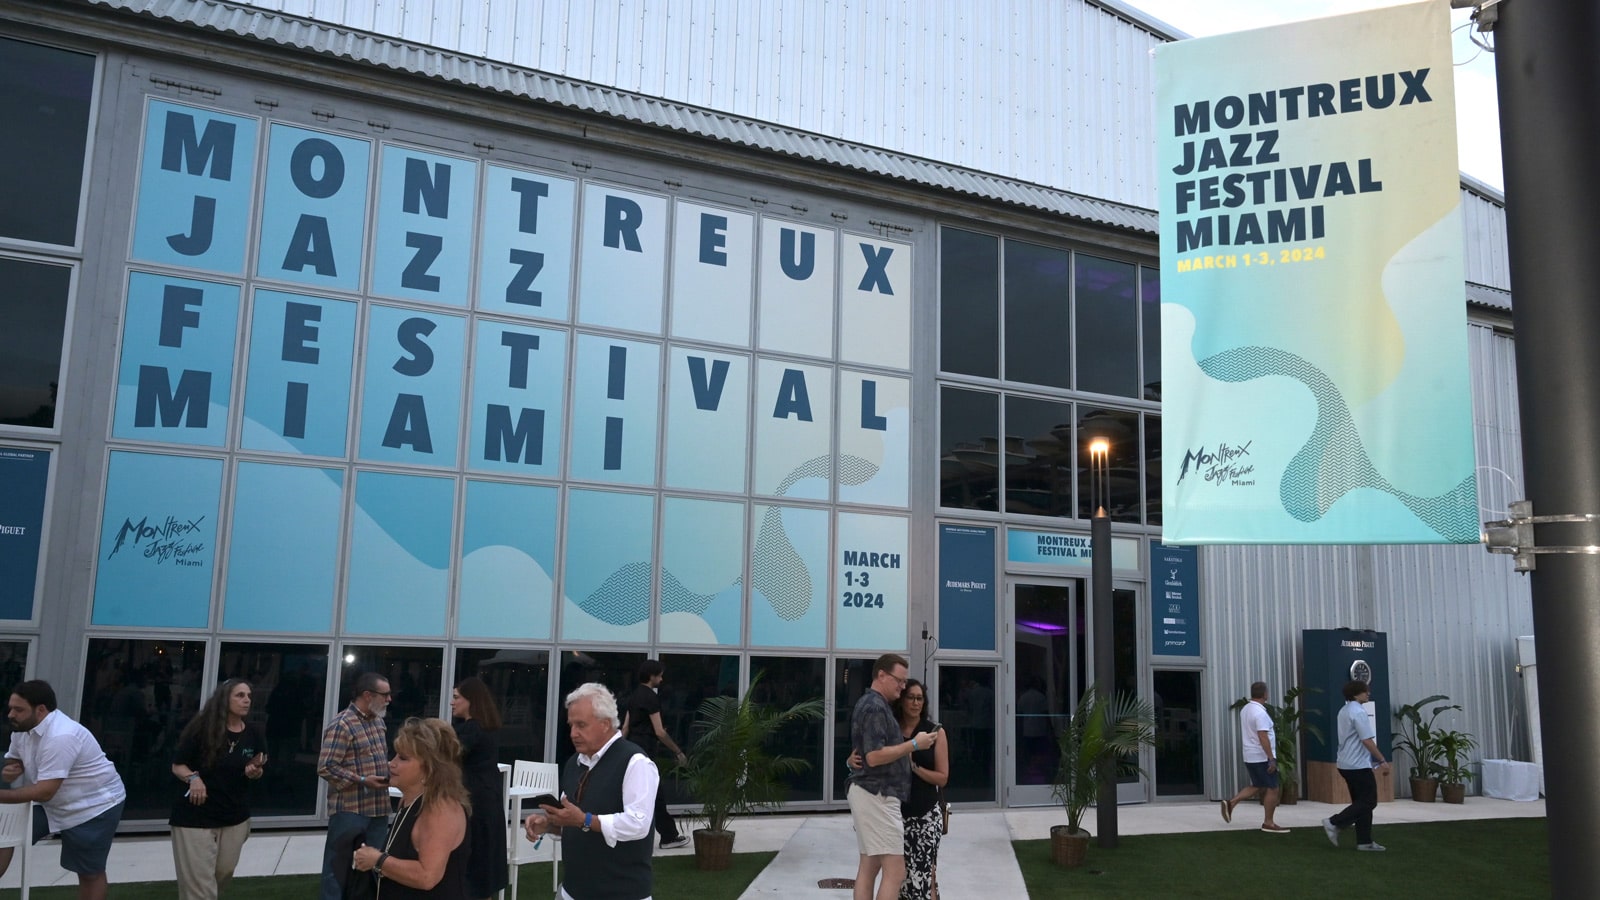 Meyer Sound Sets the Stage for the Montreux Jazz Festival Miami's Debut